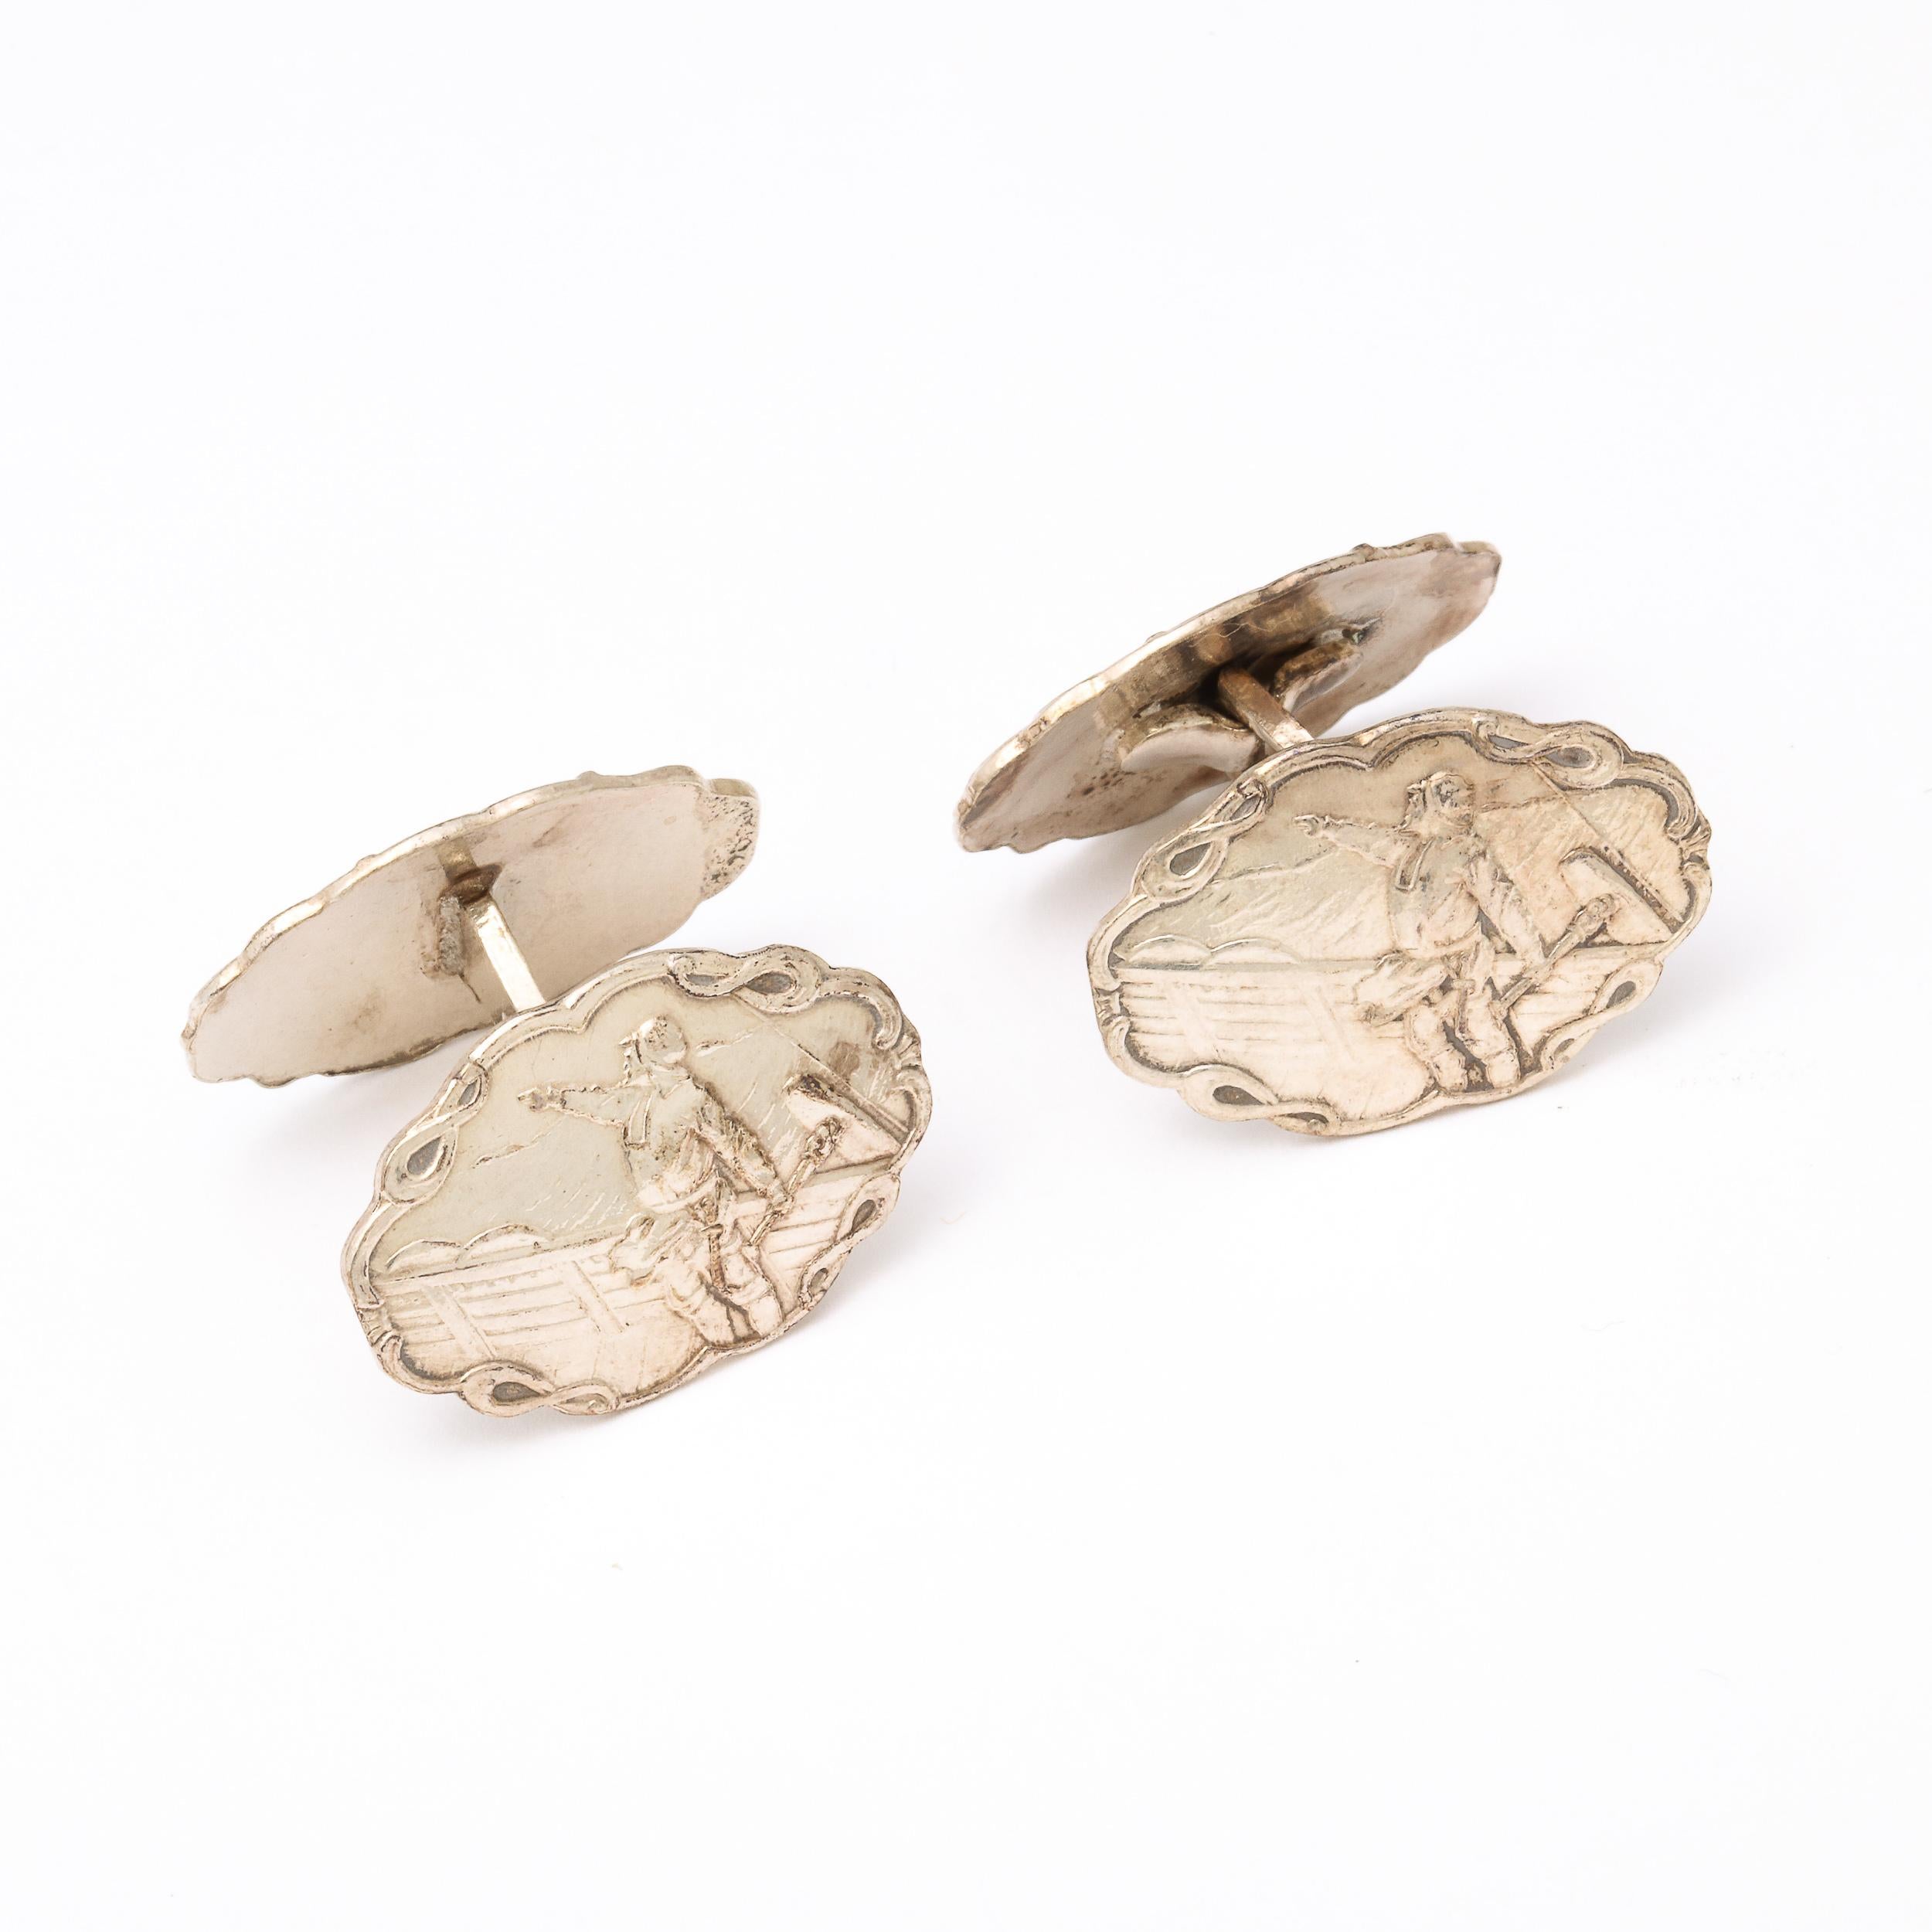 This beautiful pair of Silver Cufflinks with a scene depicting a Pointing Sailor on the deck of ship were created by the company H.C. Ostrem and originate from Norway, Circa 1930. Intended for the Officer's Training Corps (OTC), this lovely pair has